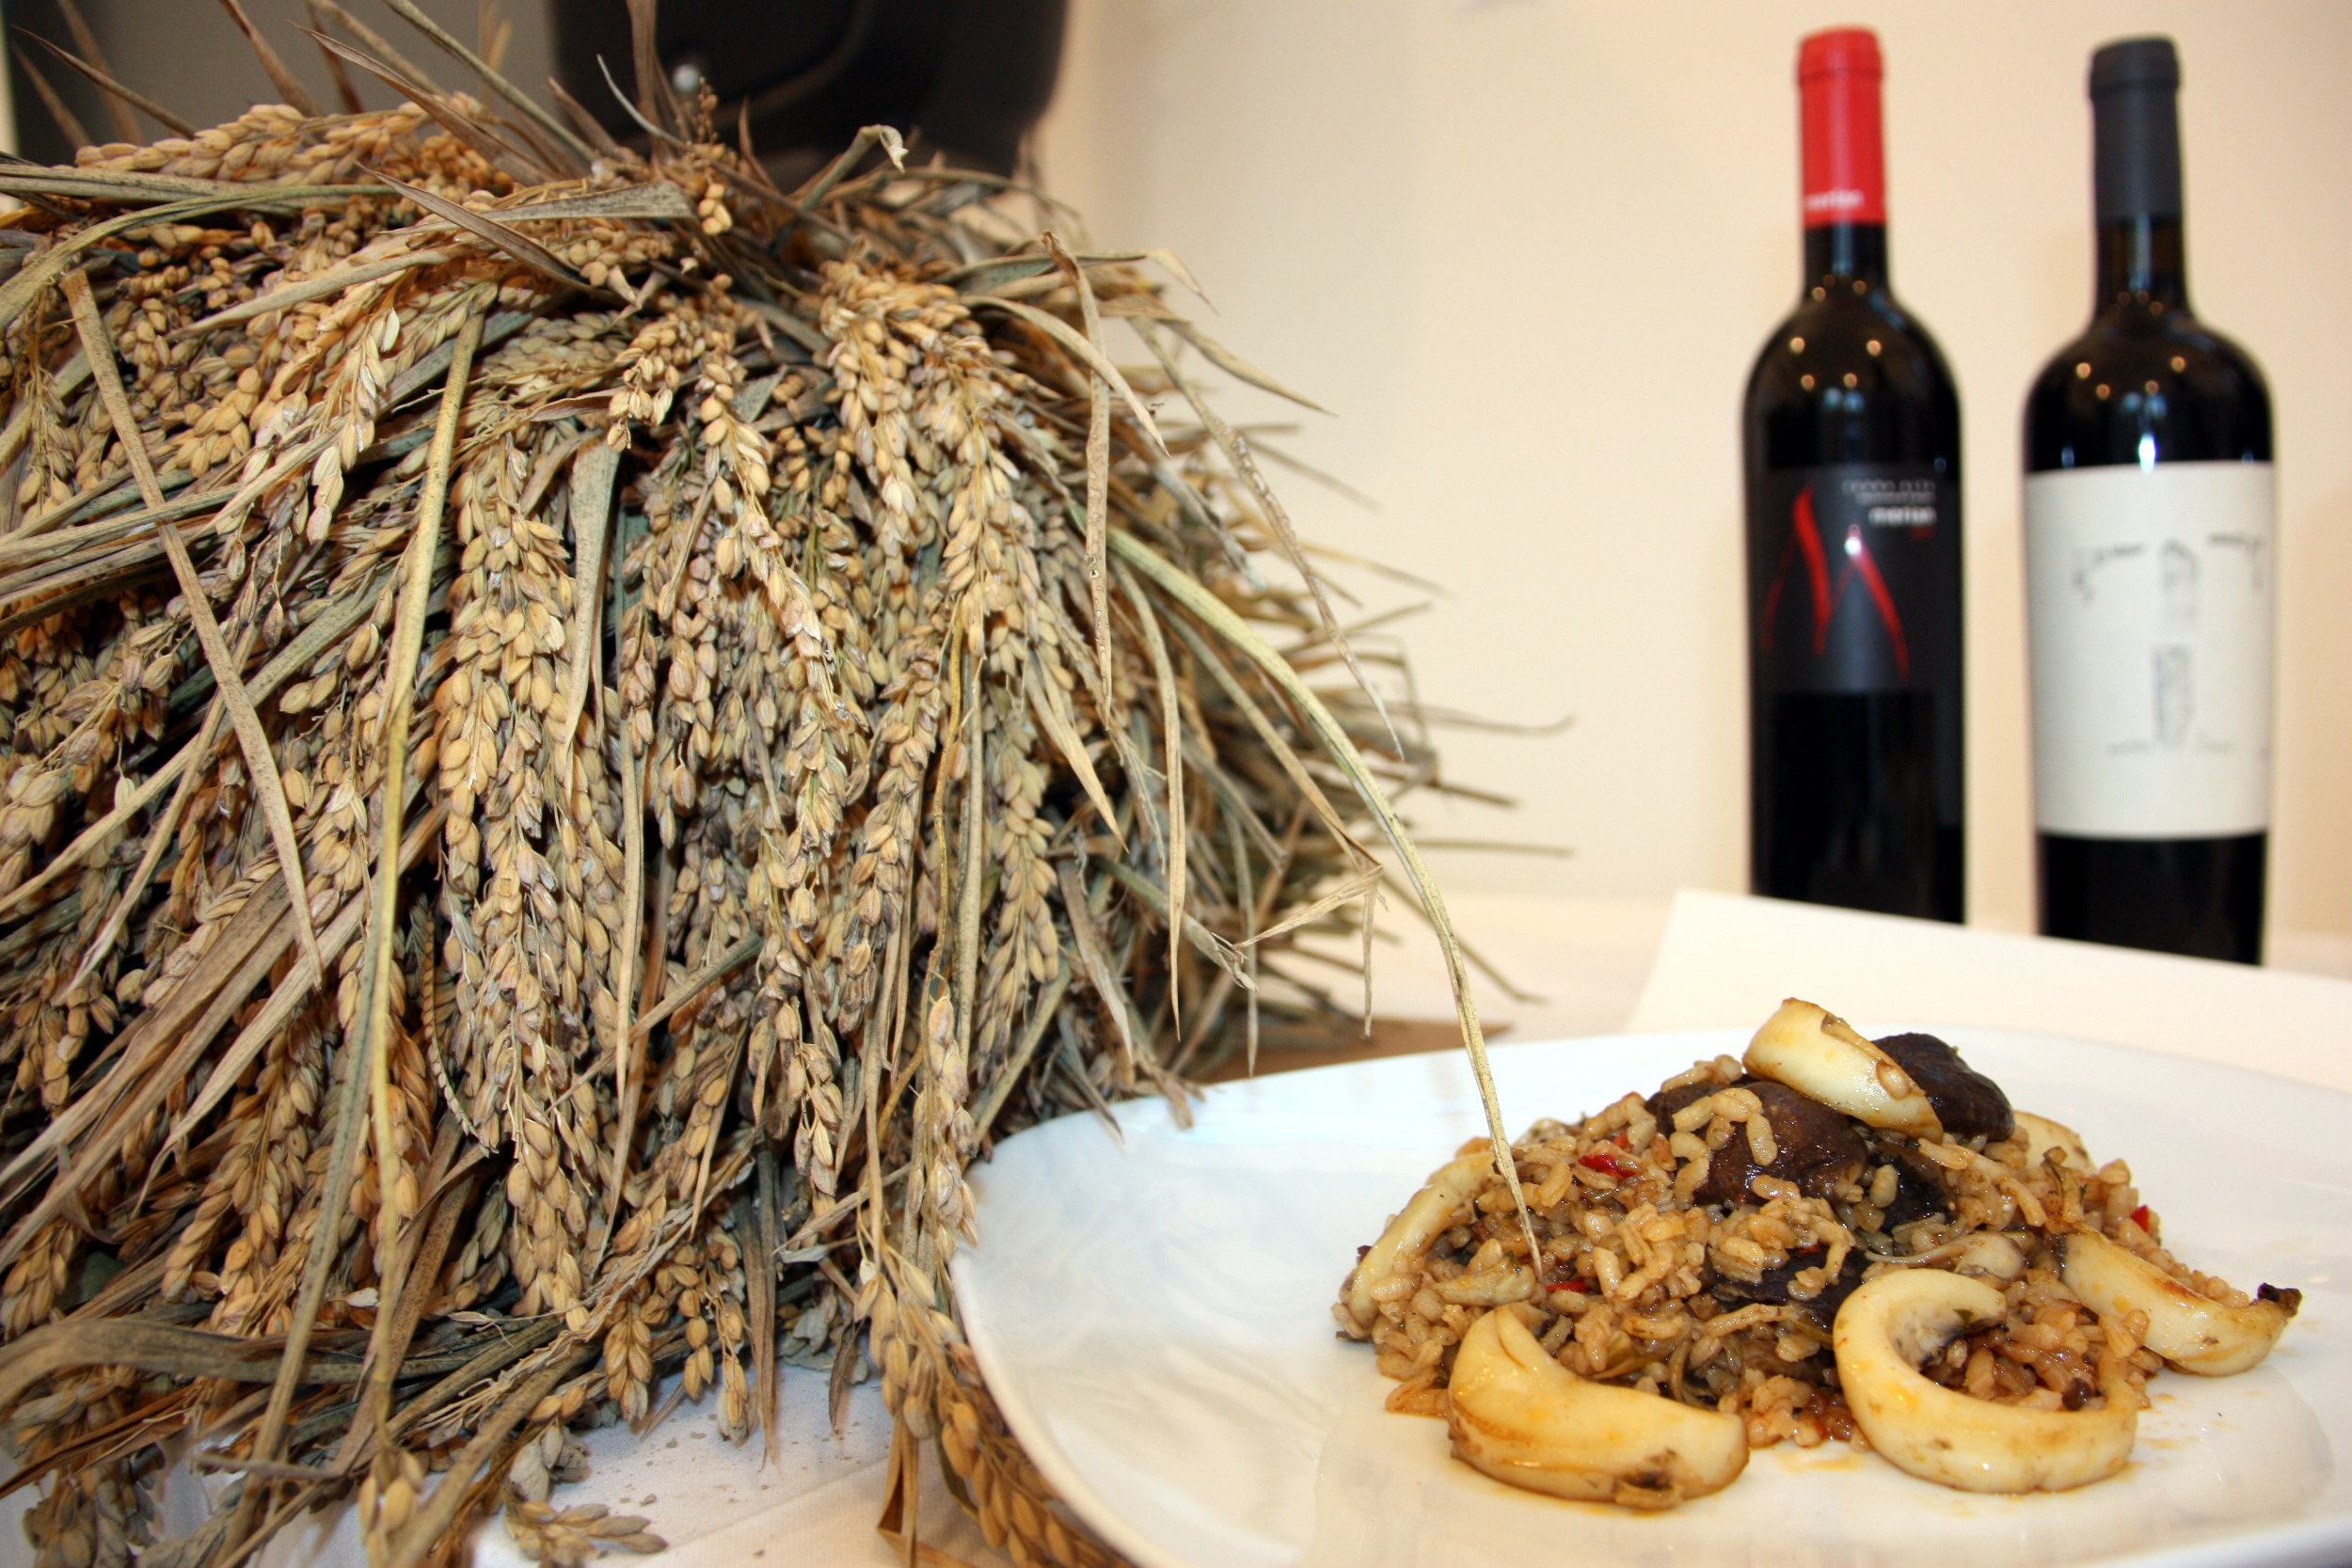 Image of Catalan wine and a local dish made with rice (by ACN)